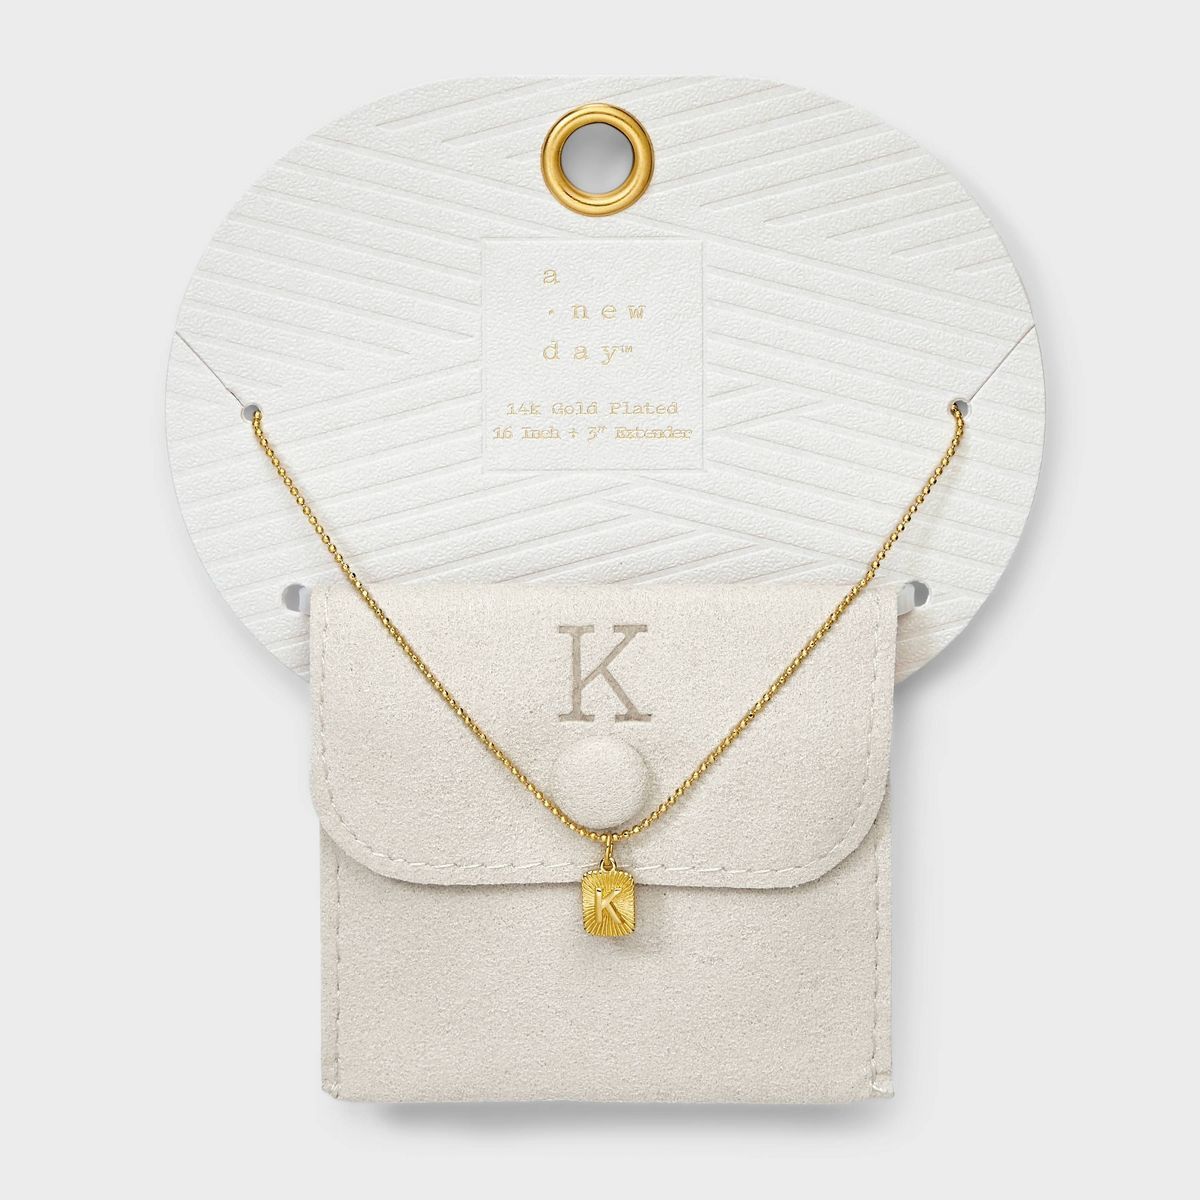 14k Gold Plated Radial Initial Tag Chain Necklace - A New Day™ Gold | Target